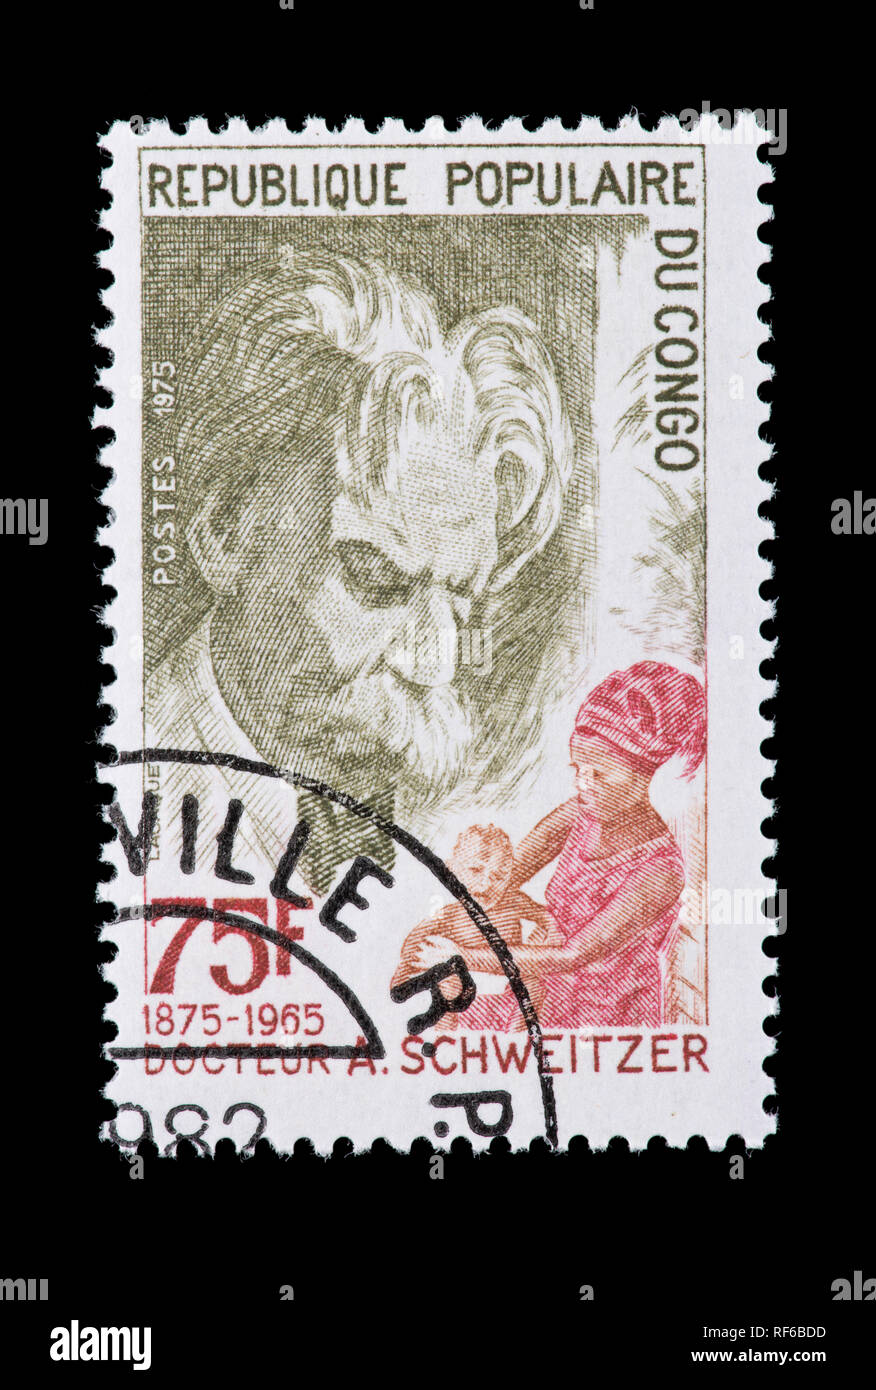 Postage stamp from the People's Republic of Congo depicting Albert Schweitzer, medical missionary, 10th anniversary of death. Stock Photo